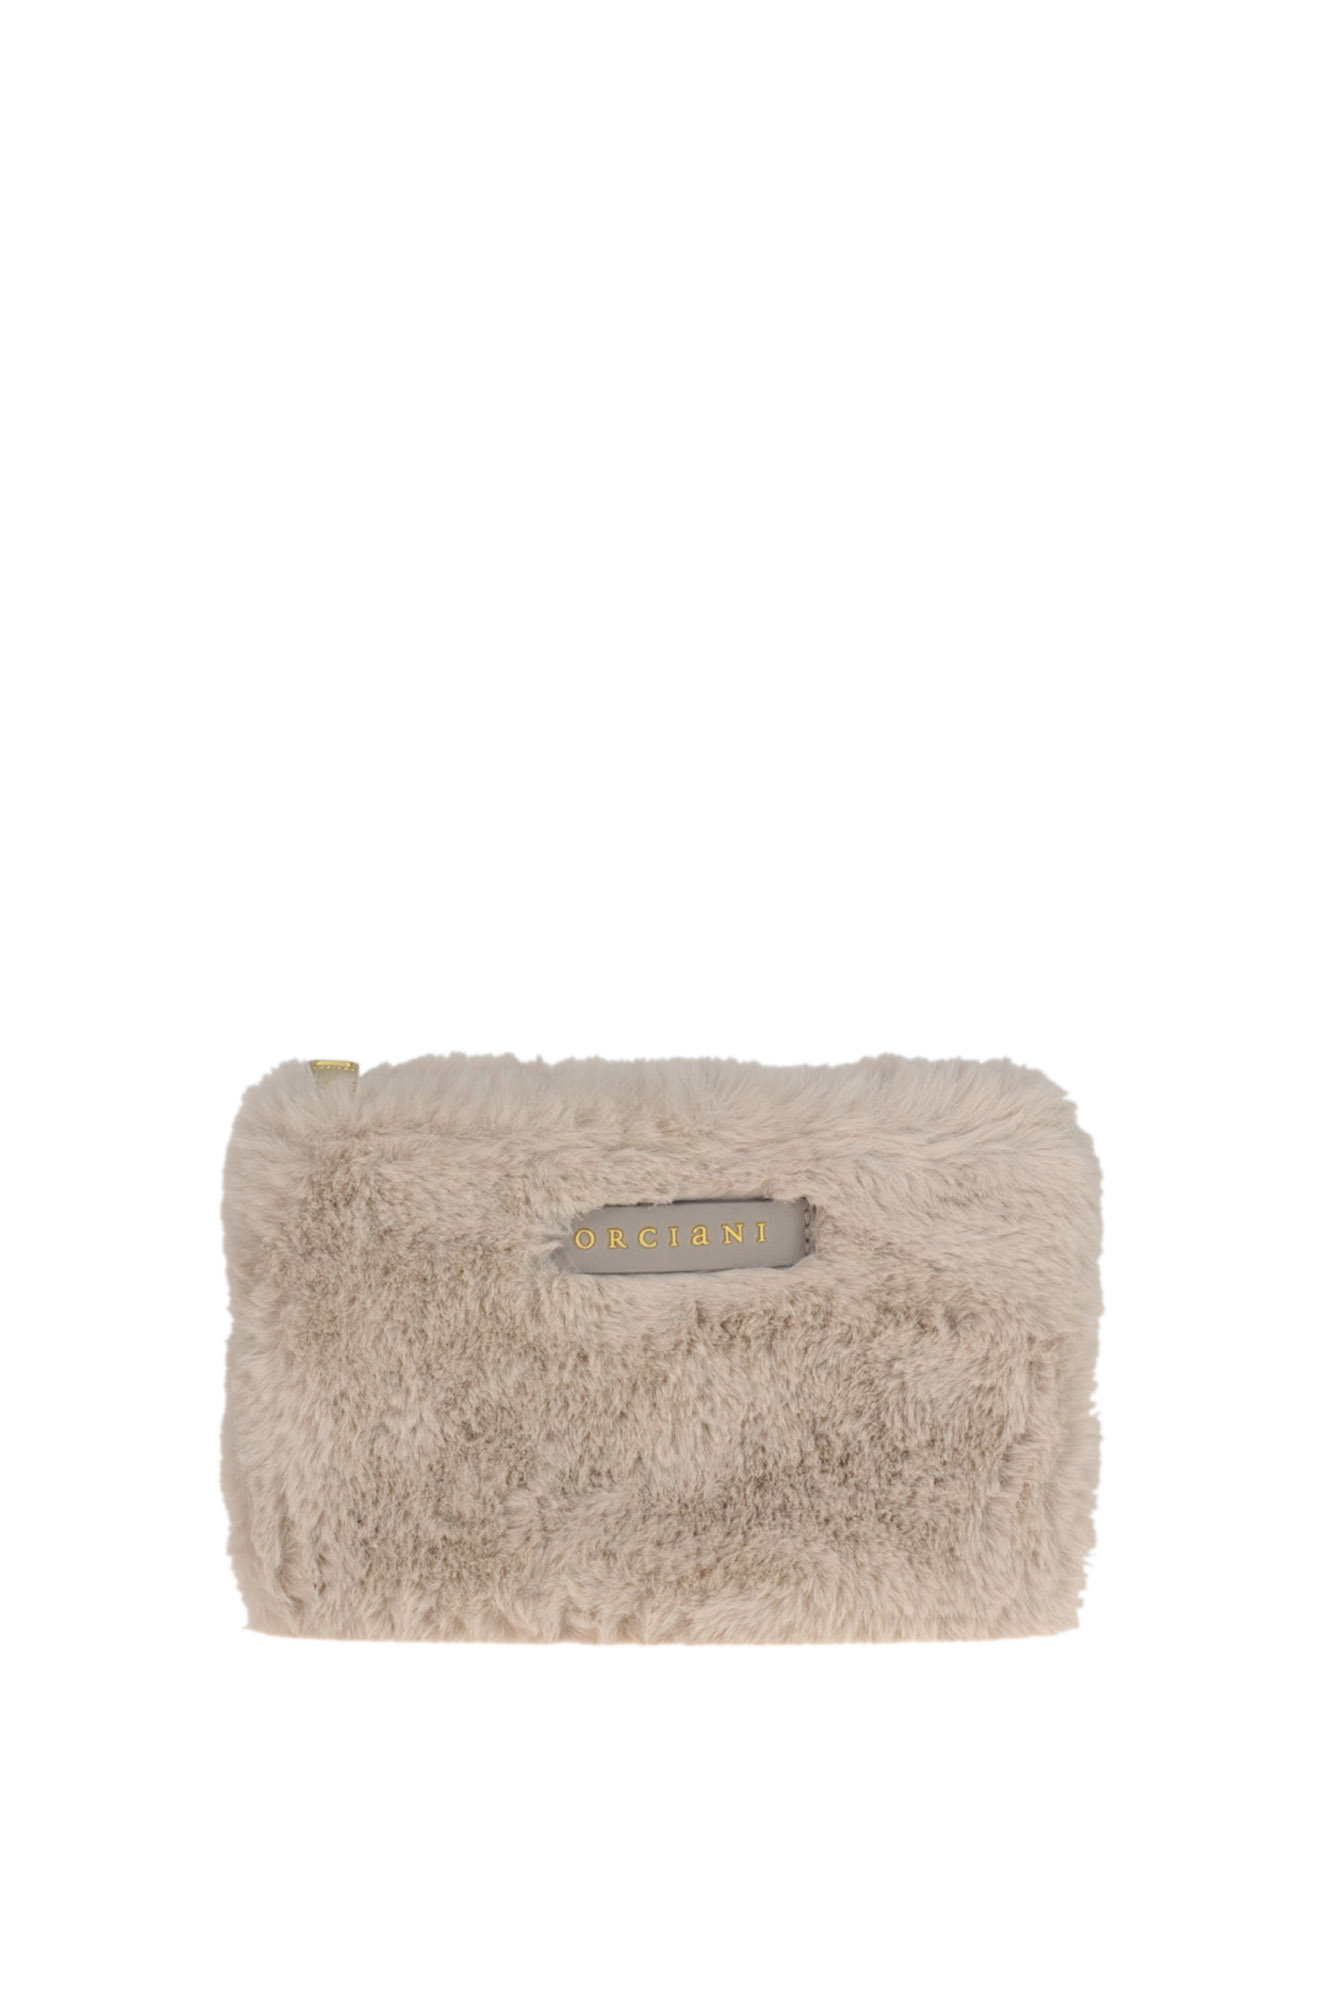 Orciani Eco-fur Pouch In Beige